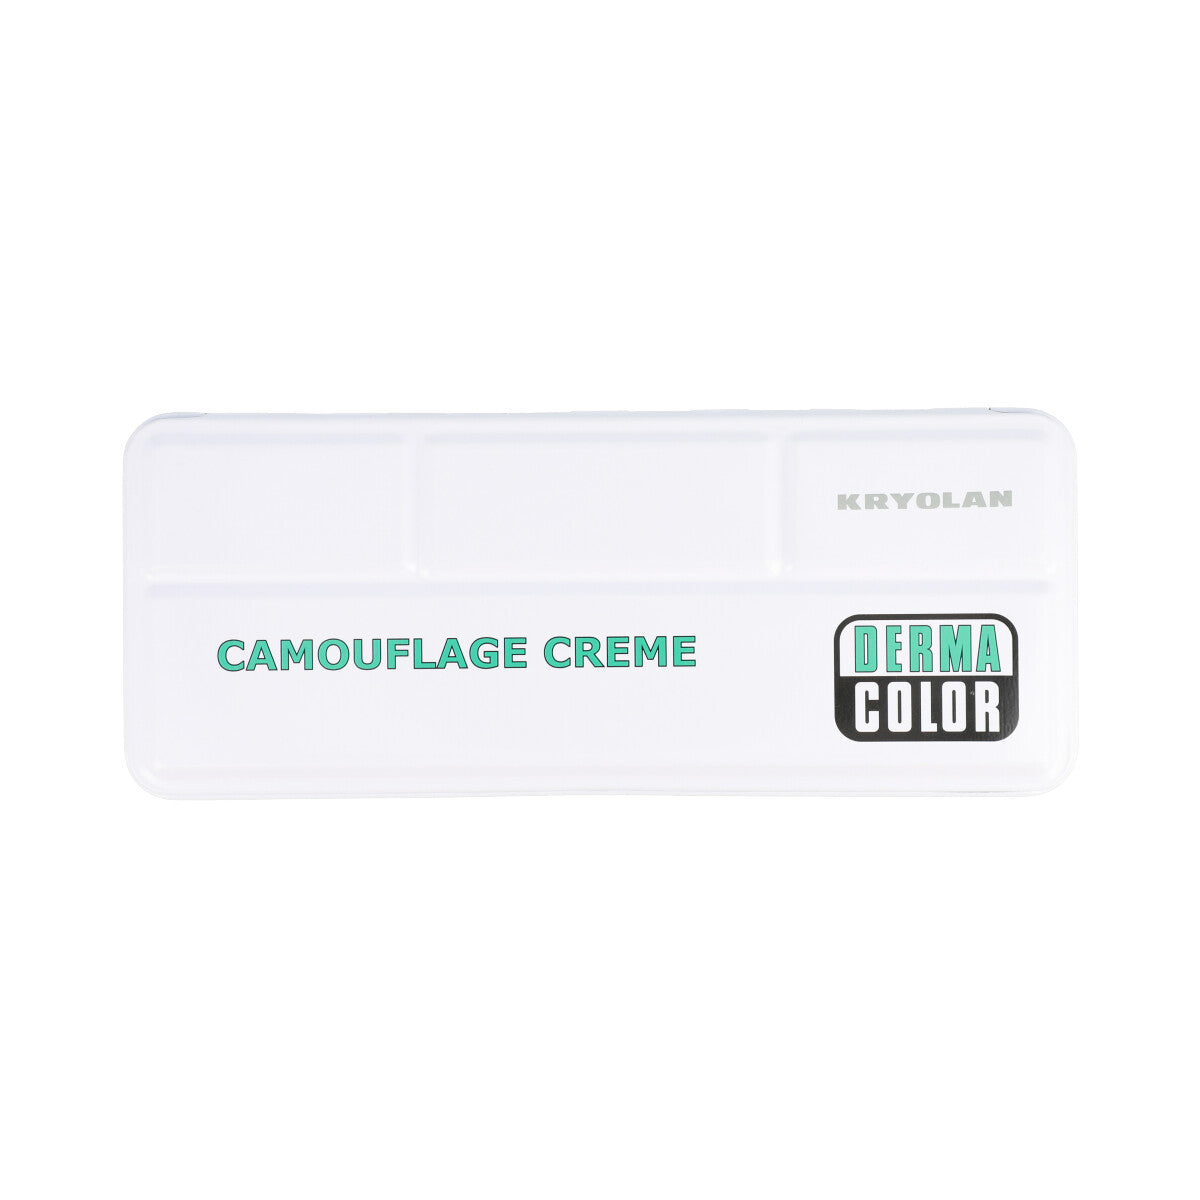 Camouflage Creme 12 Palette A